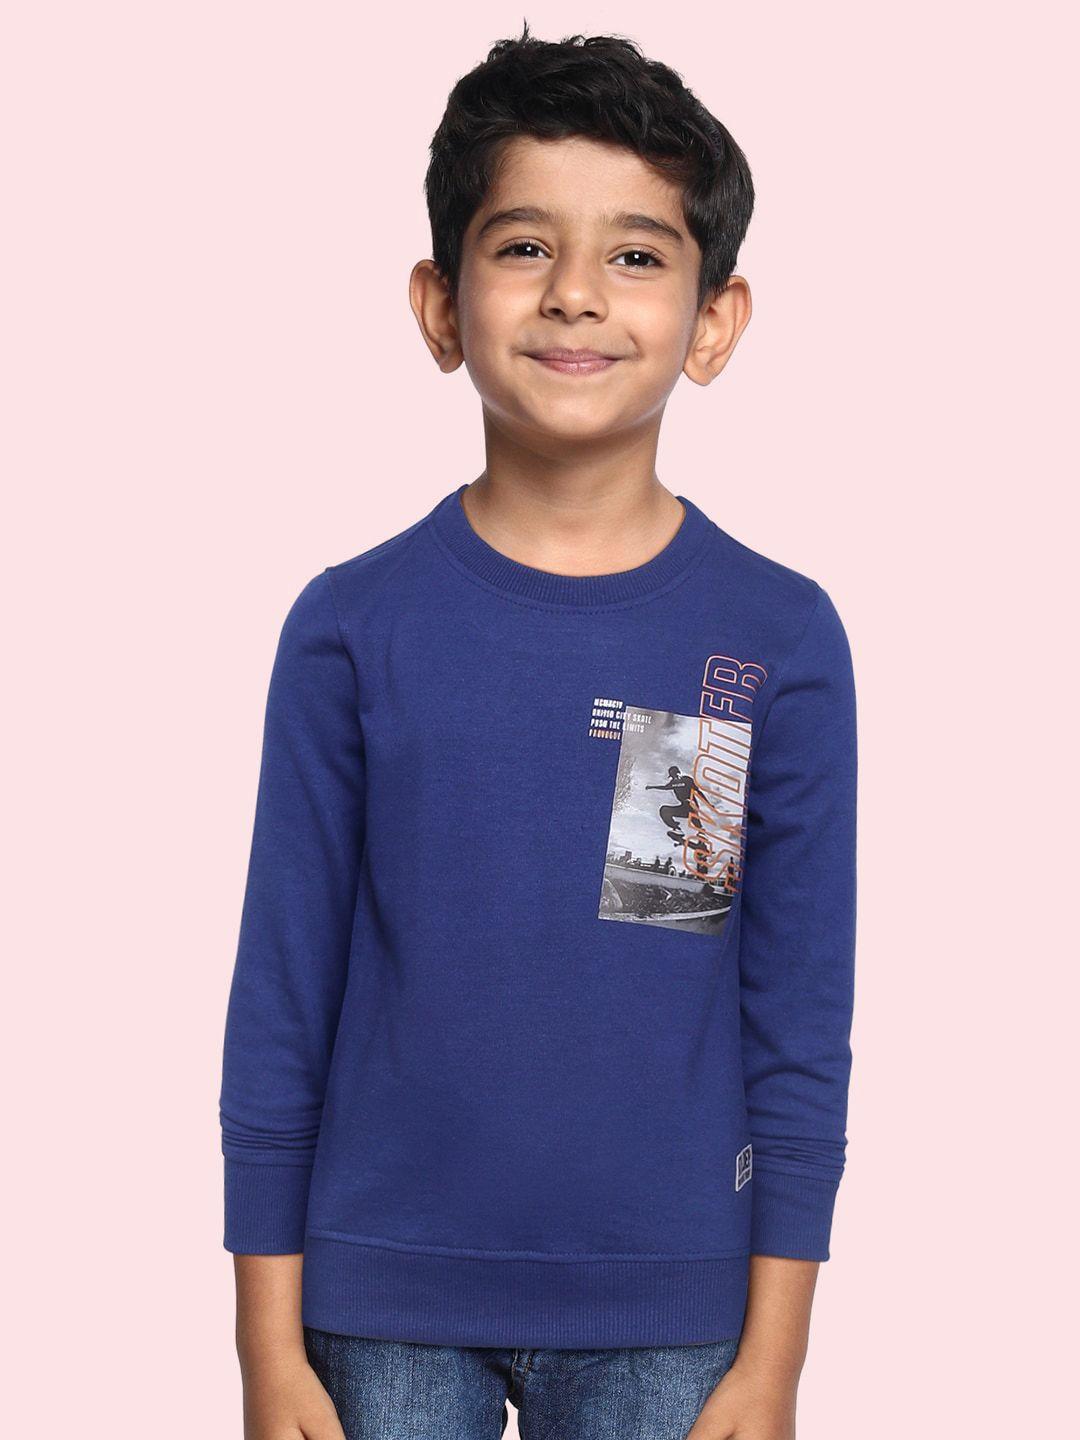 provogue boys navy blue solid sweatshirt with typography print detail